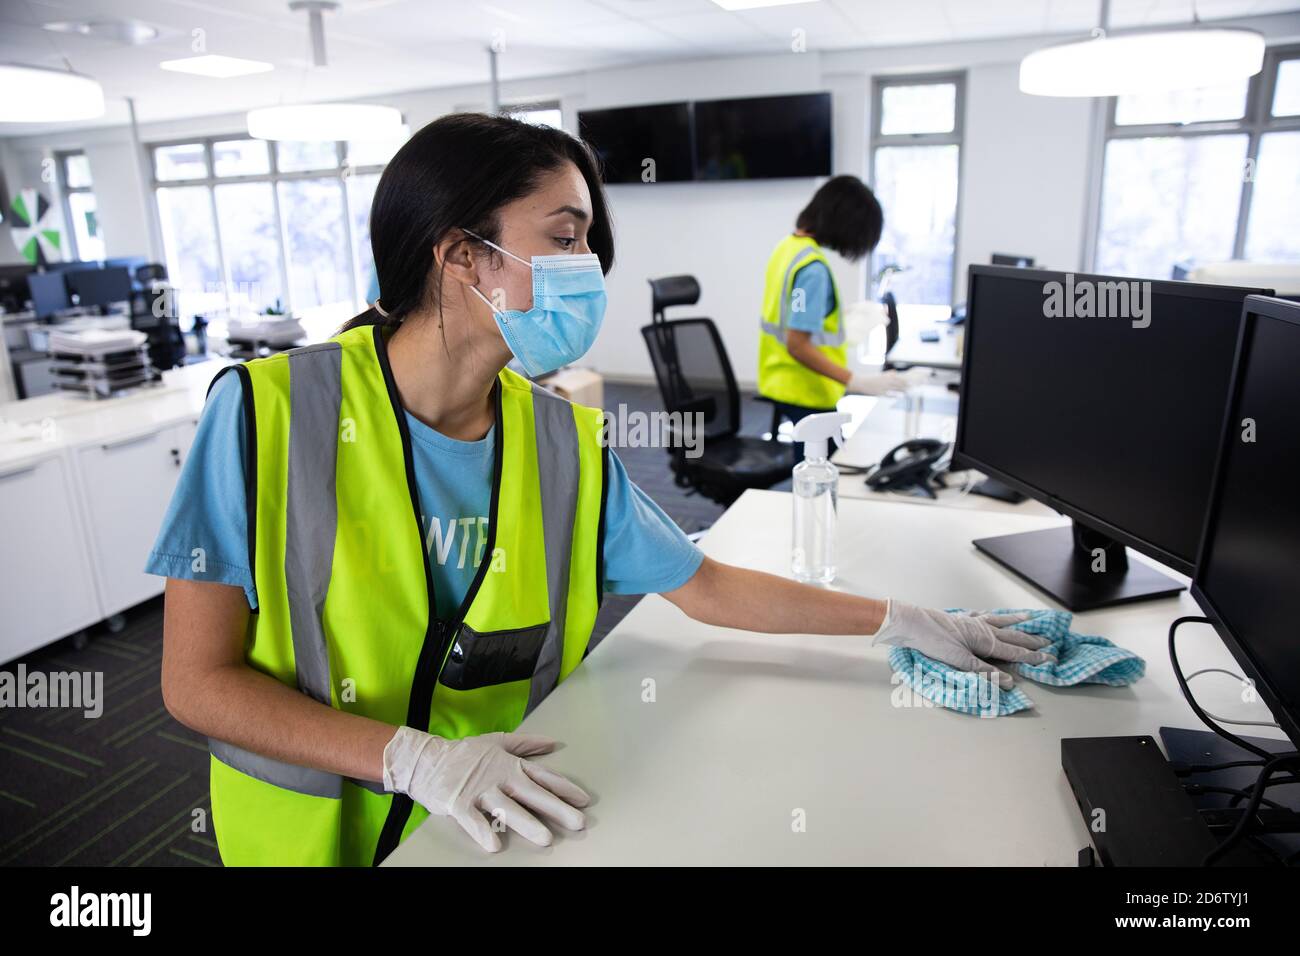 Woman wearing hi vis vest and face mask cleaning the office using disinfectant Stock Photo